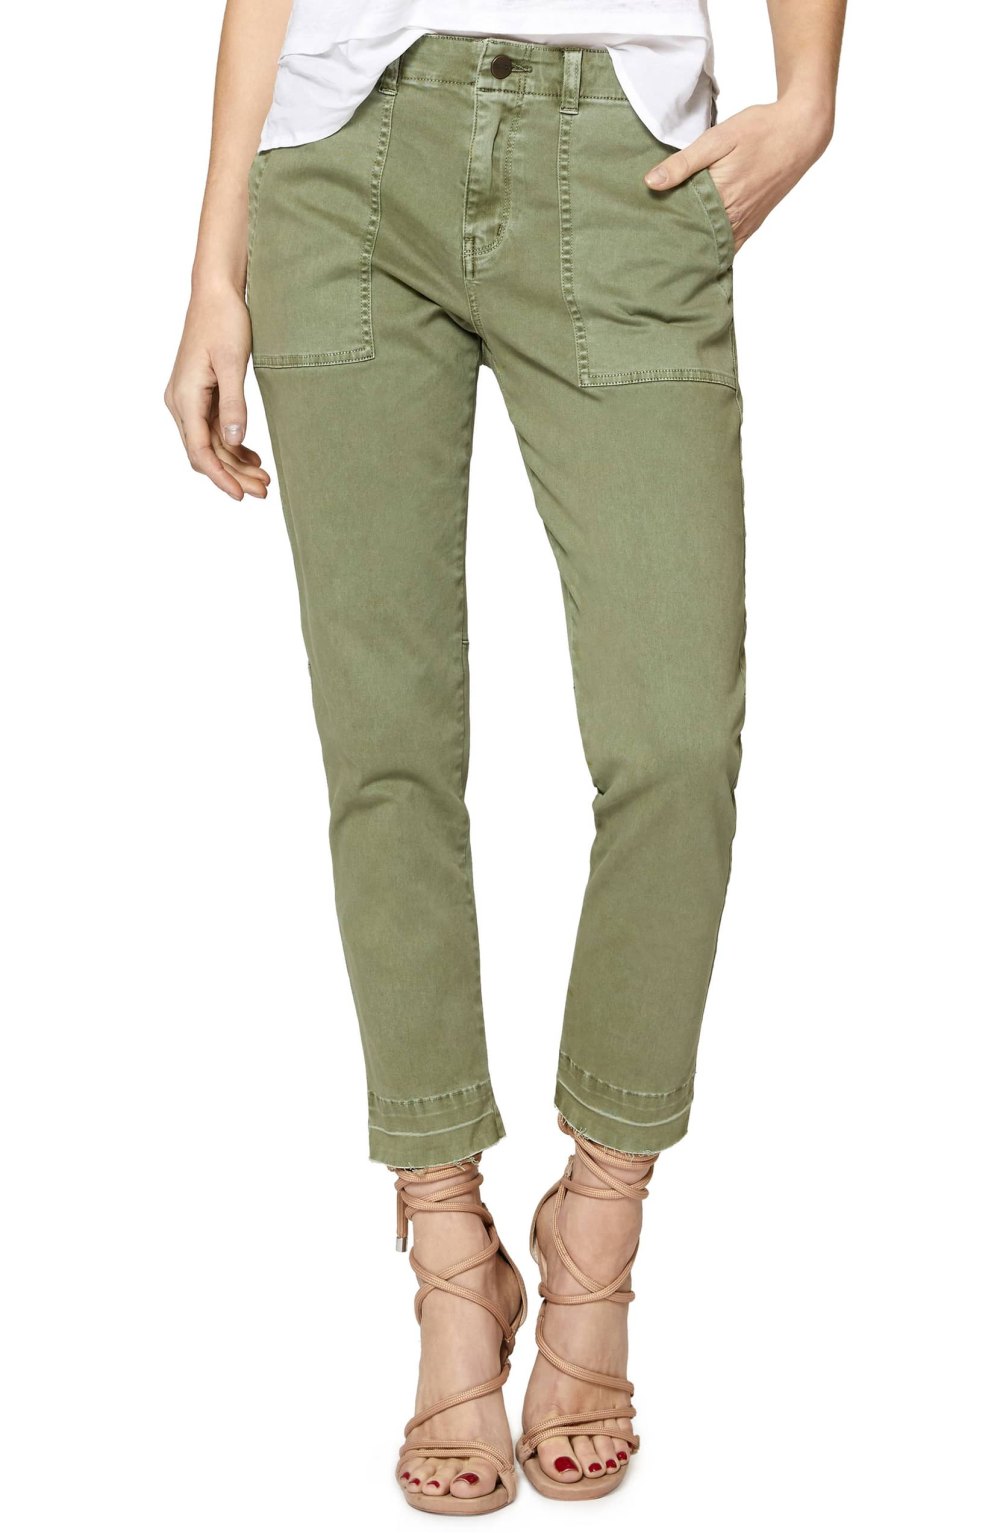 Shop These Cargo Pants Inspired by New York Fashion Week | Us Weekly